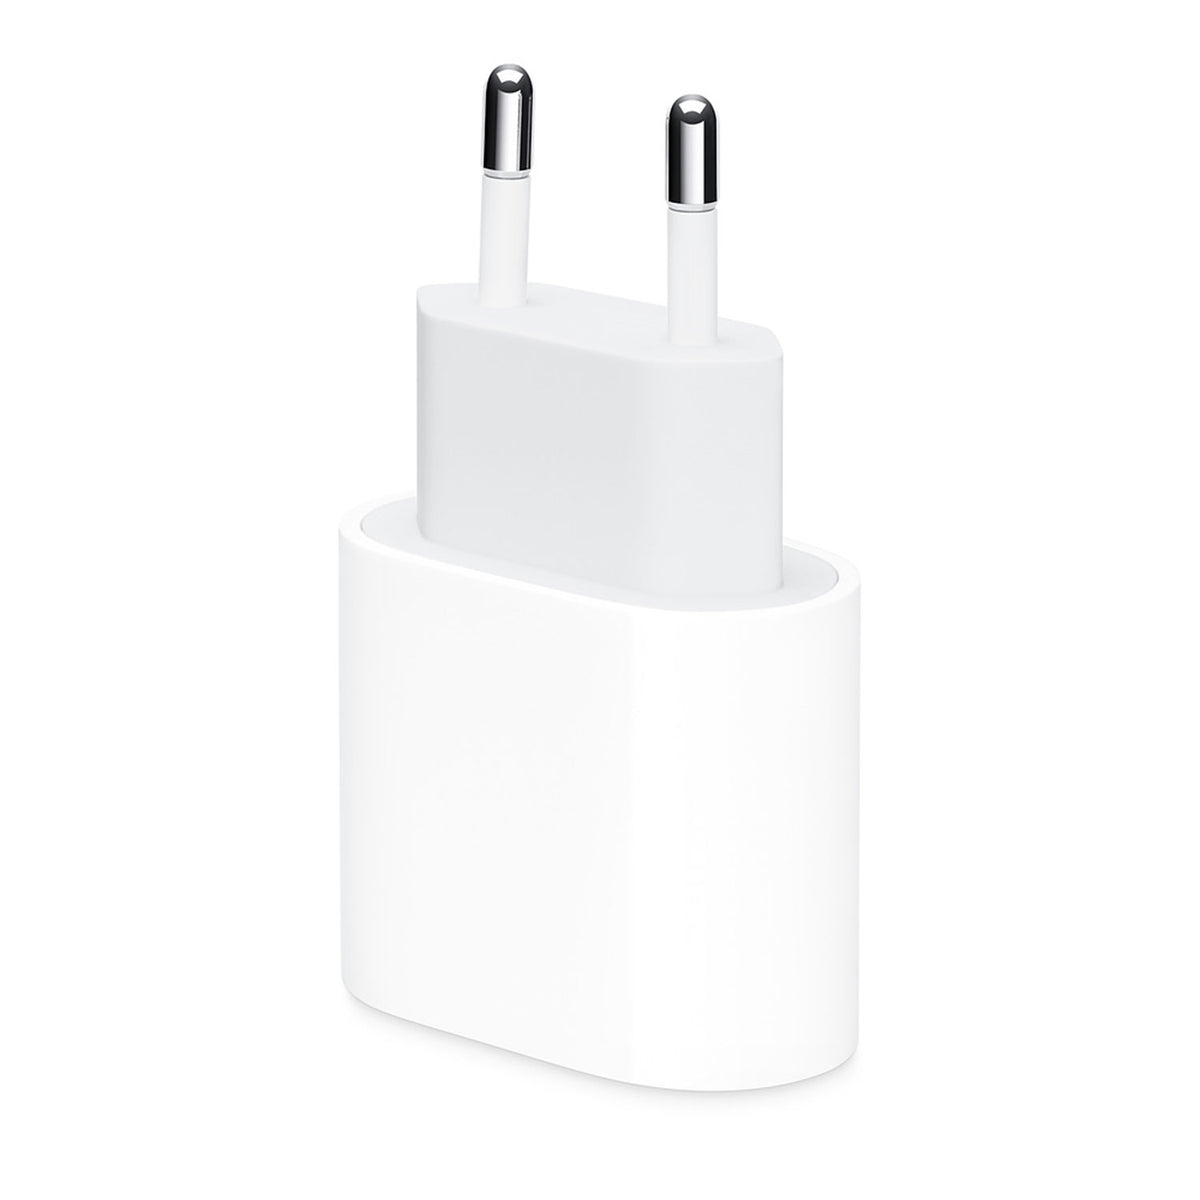 20W USB-C POWER ADAPTER FOR IPHONE- EU VERSION